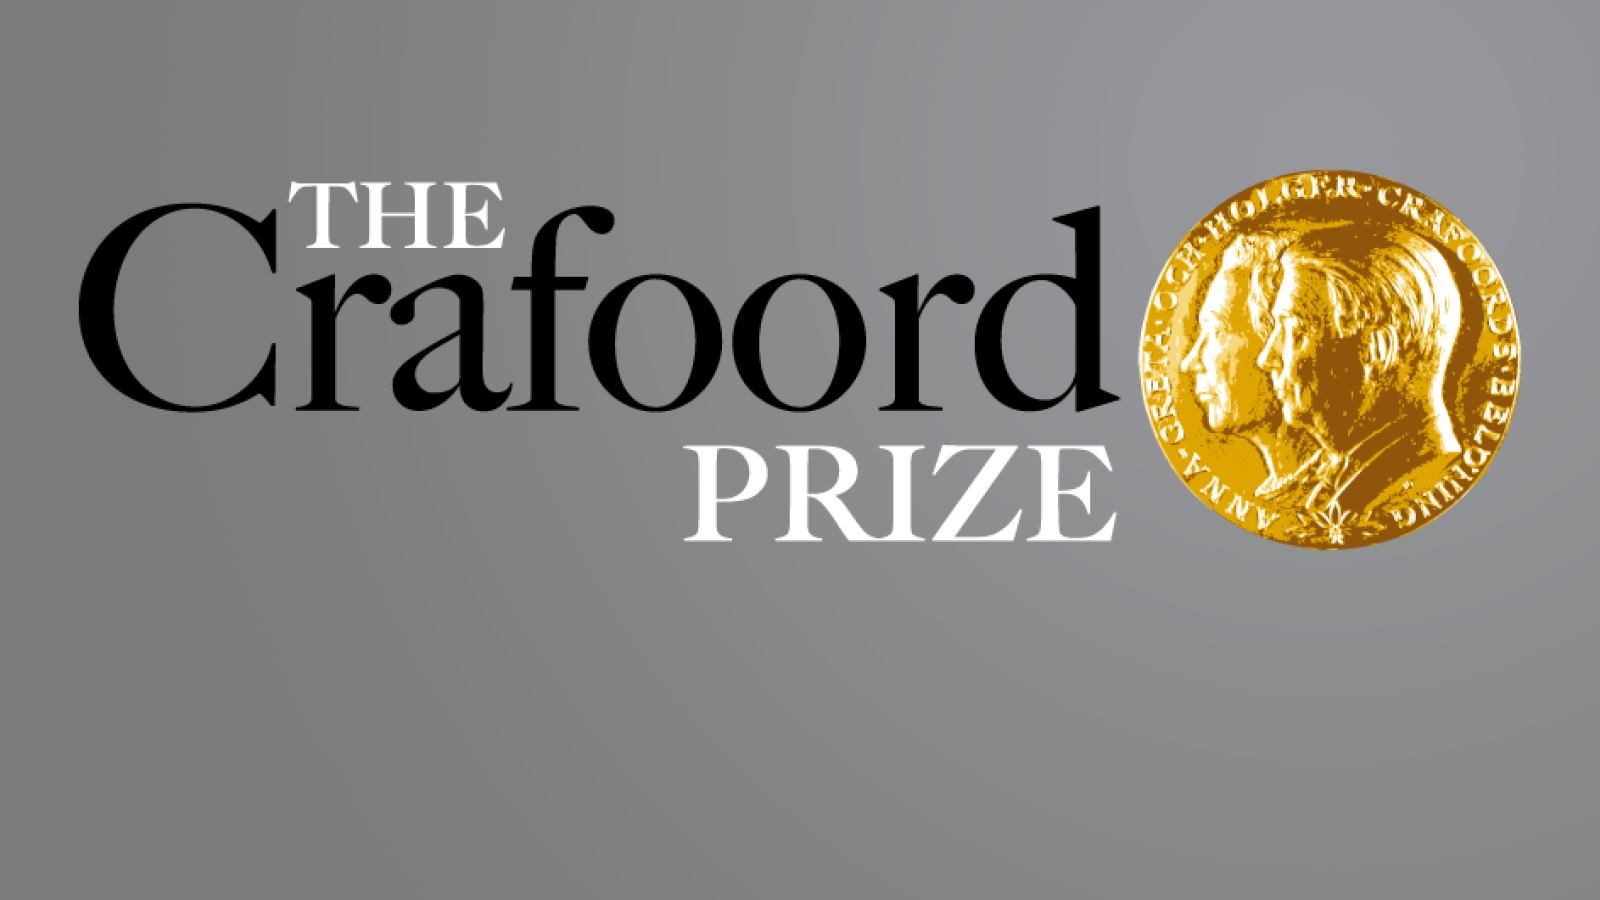 The Crafoord Prize